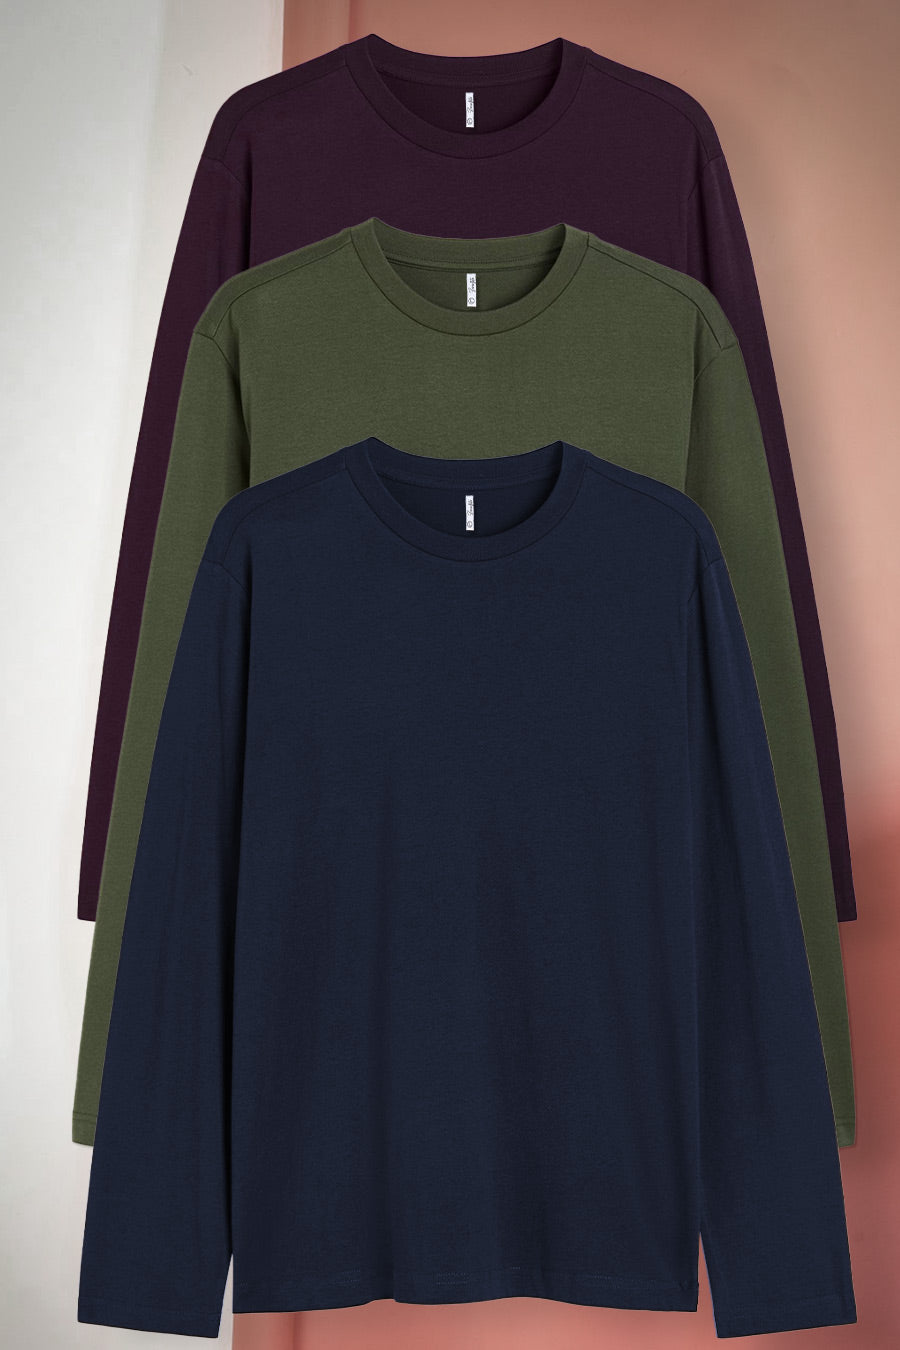 Pack 3 - Wine, Olive & Navy Blue - Classic Full sleeve